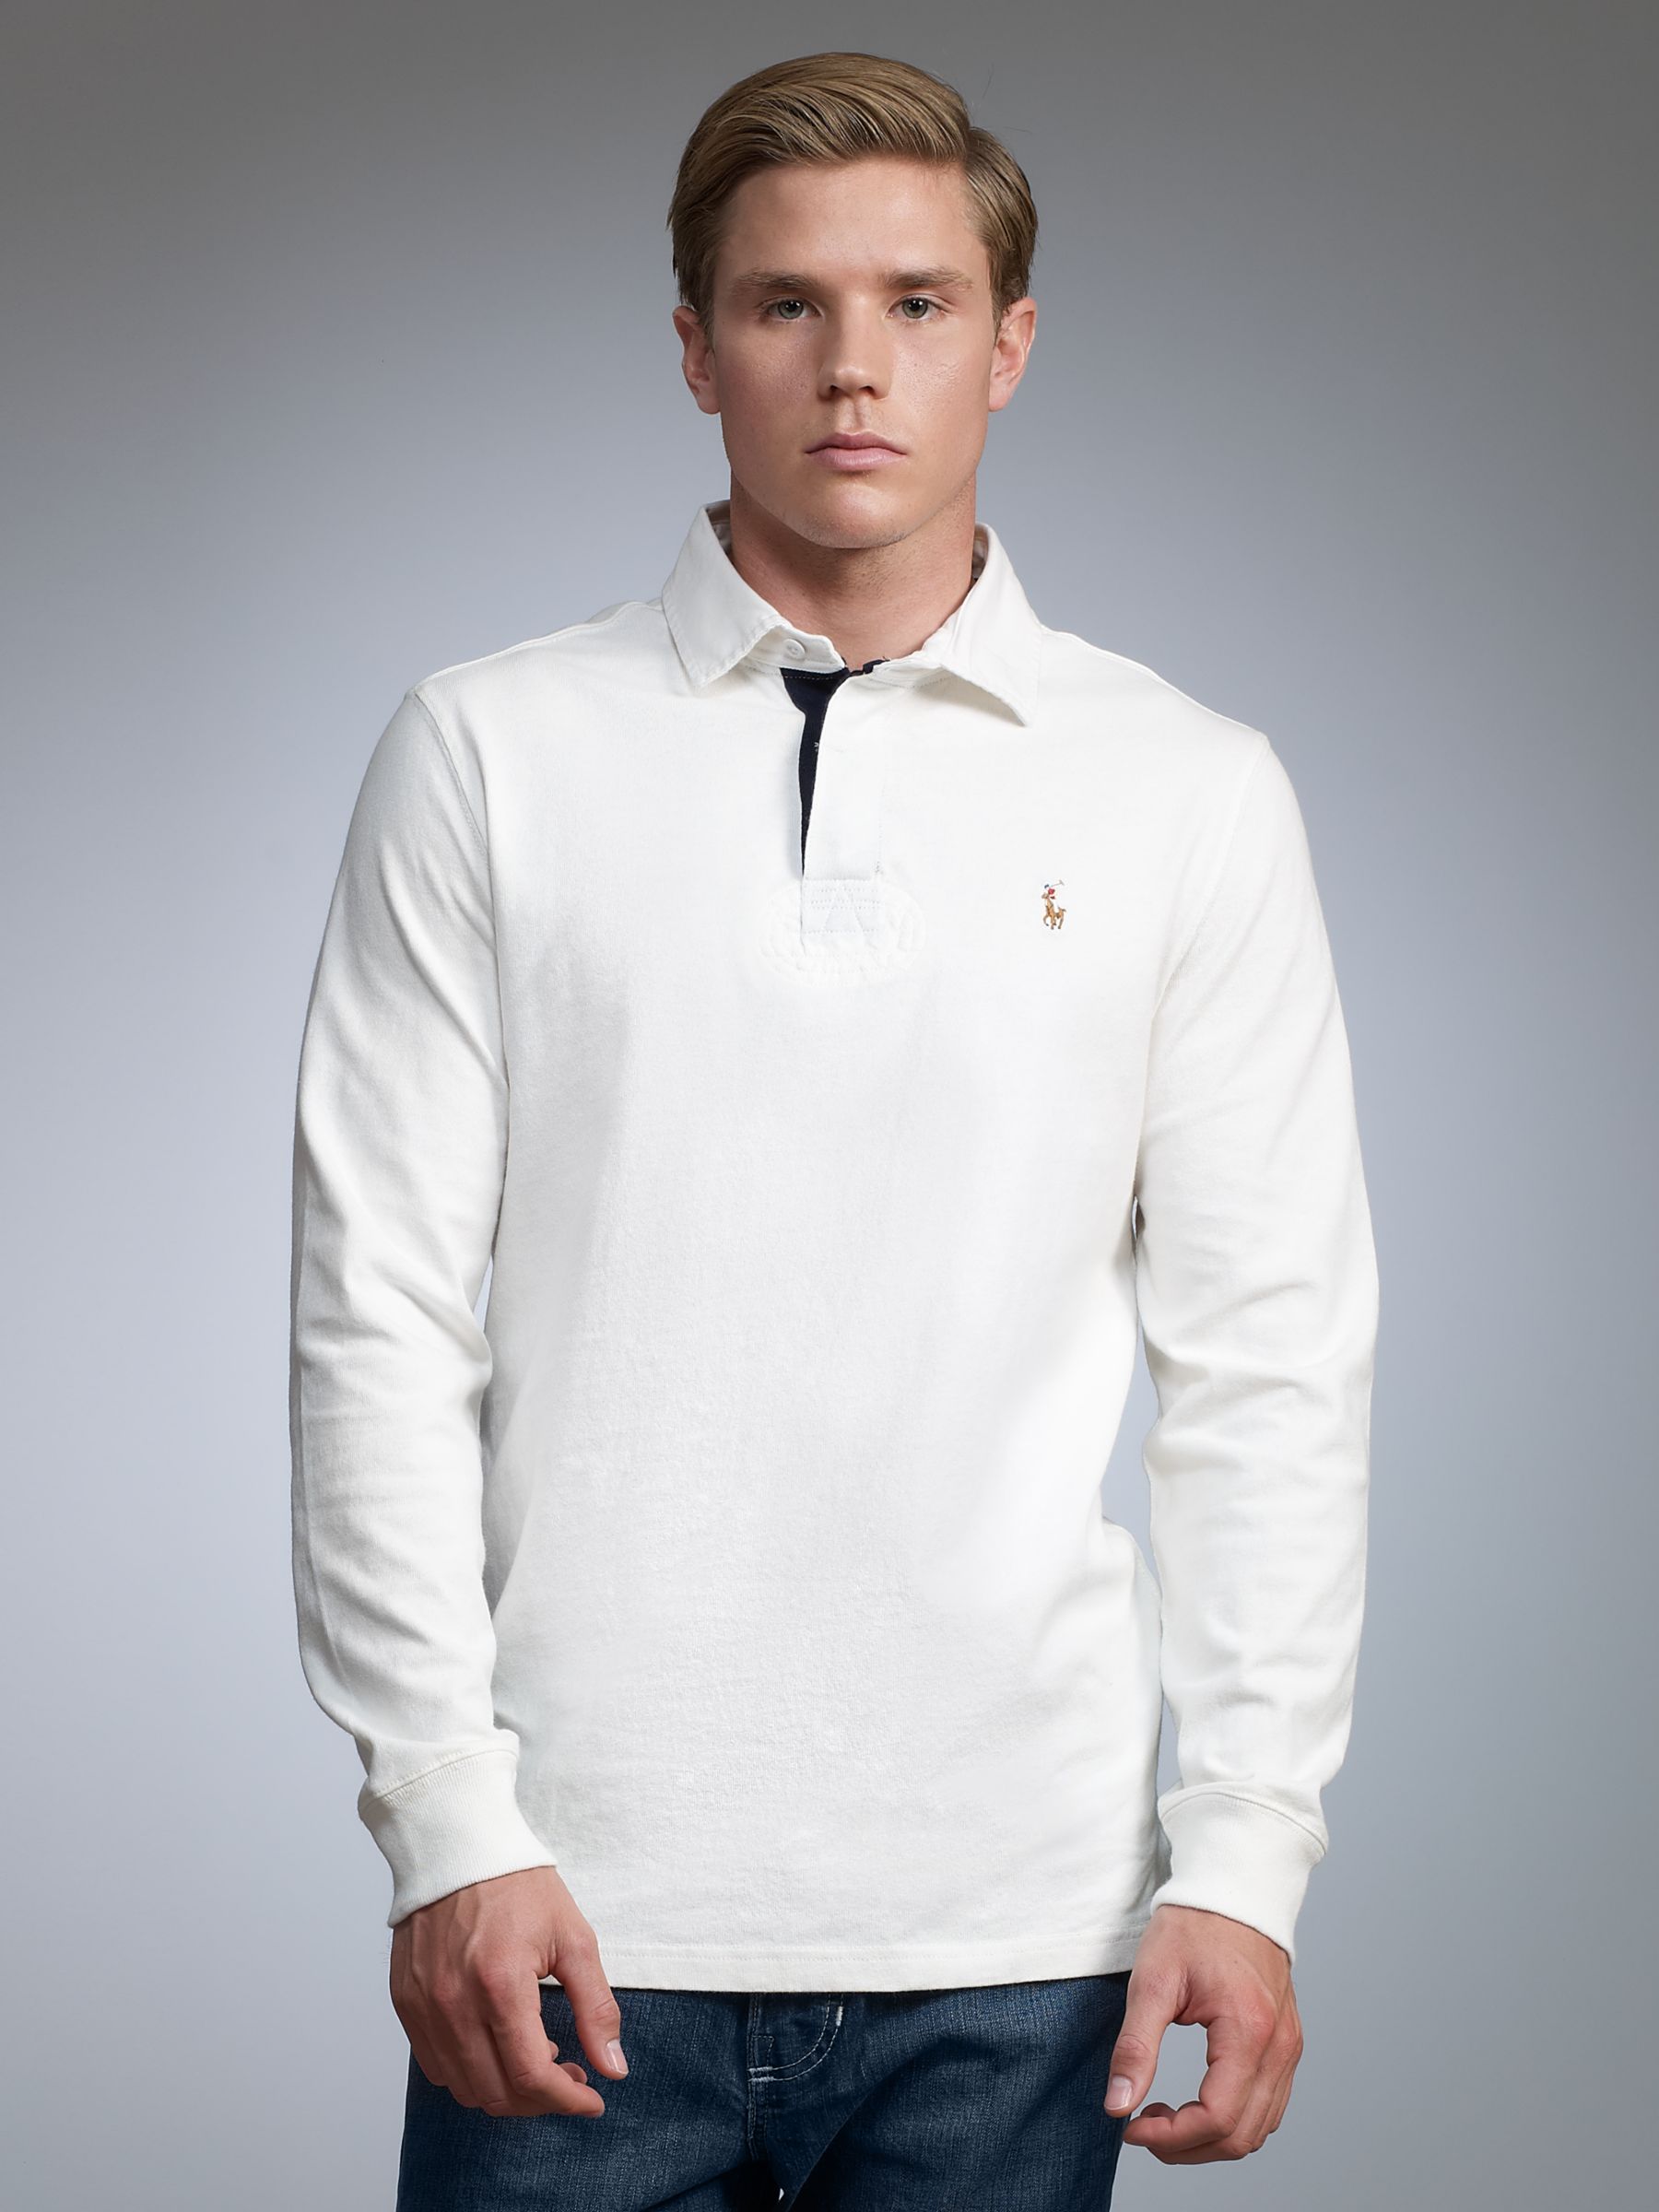 Polo Ralph Lauren Custom Fit Rugby Shirt, White